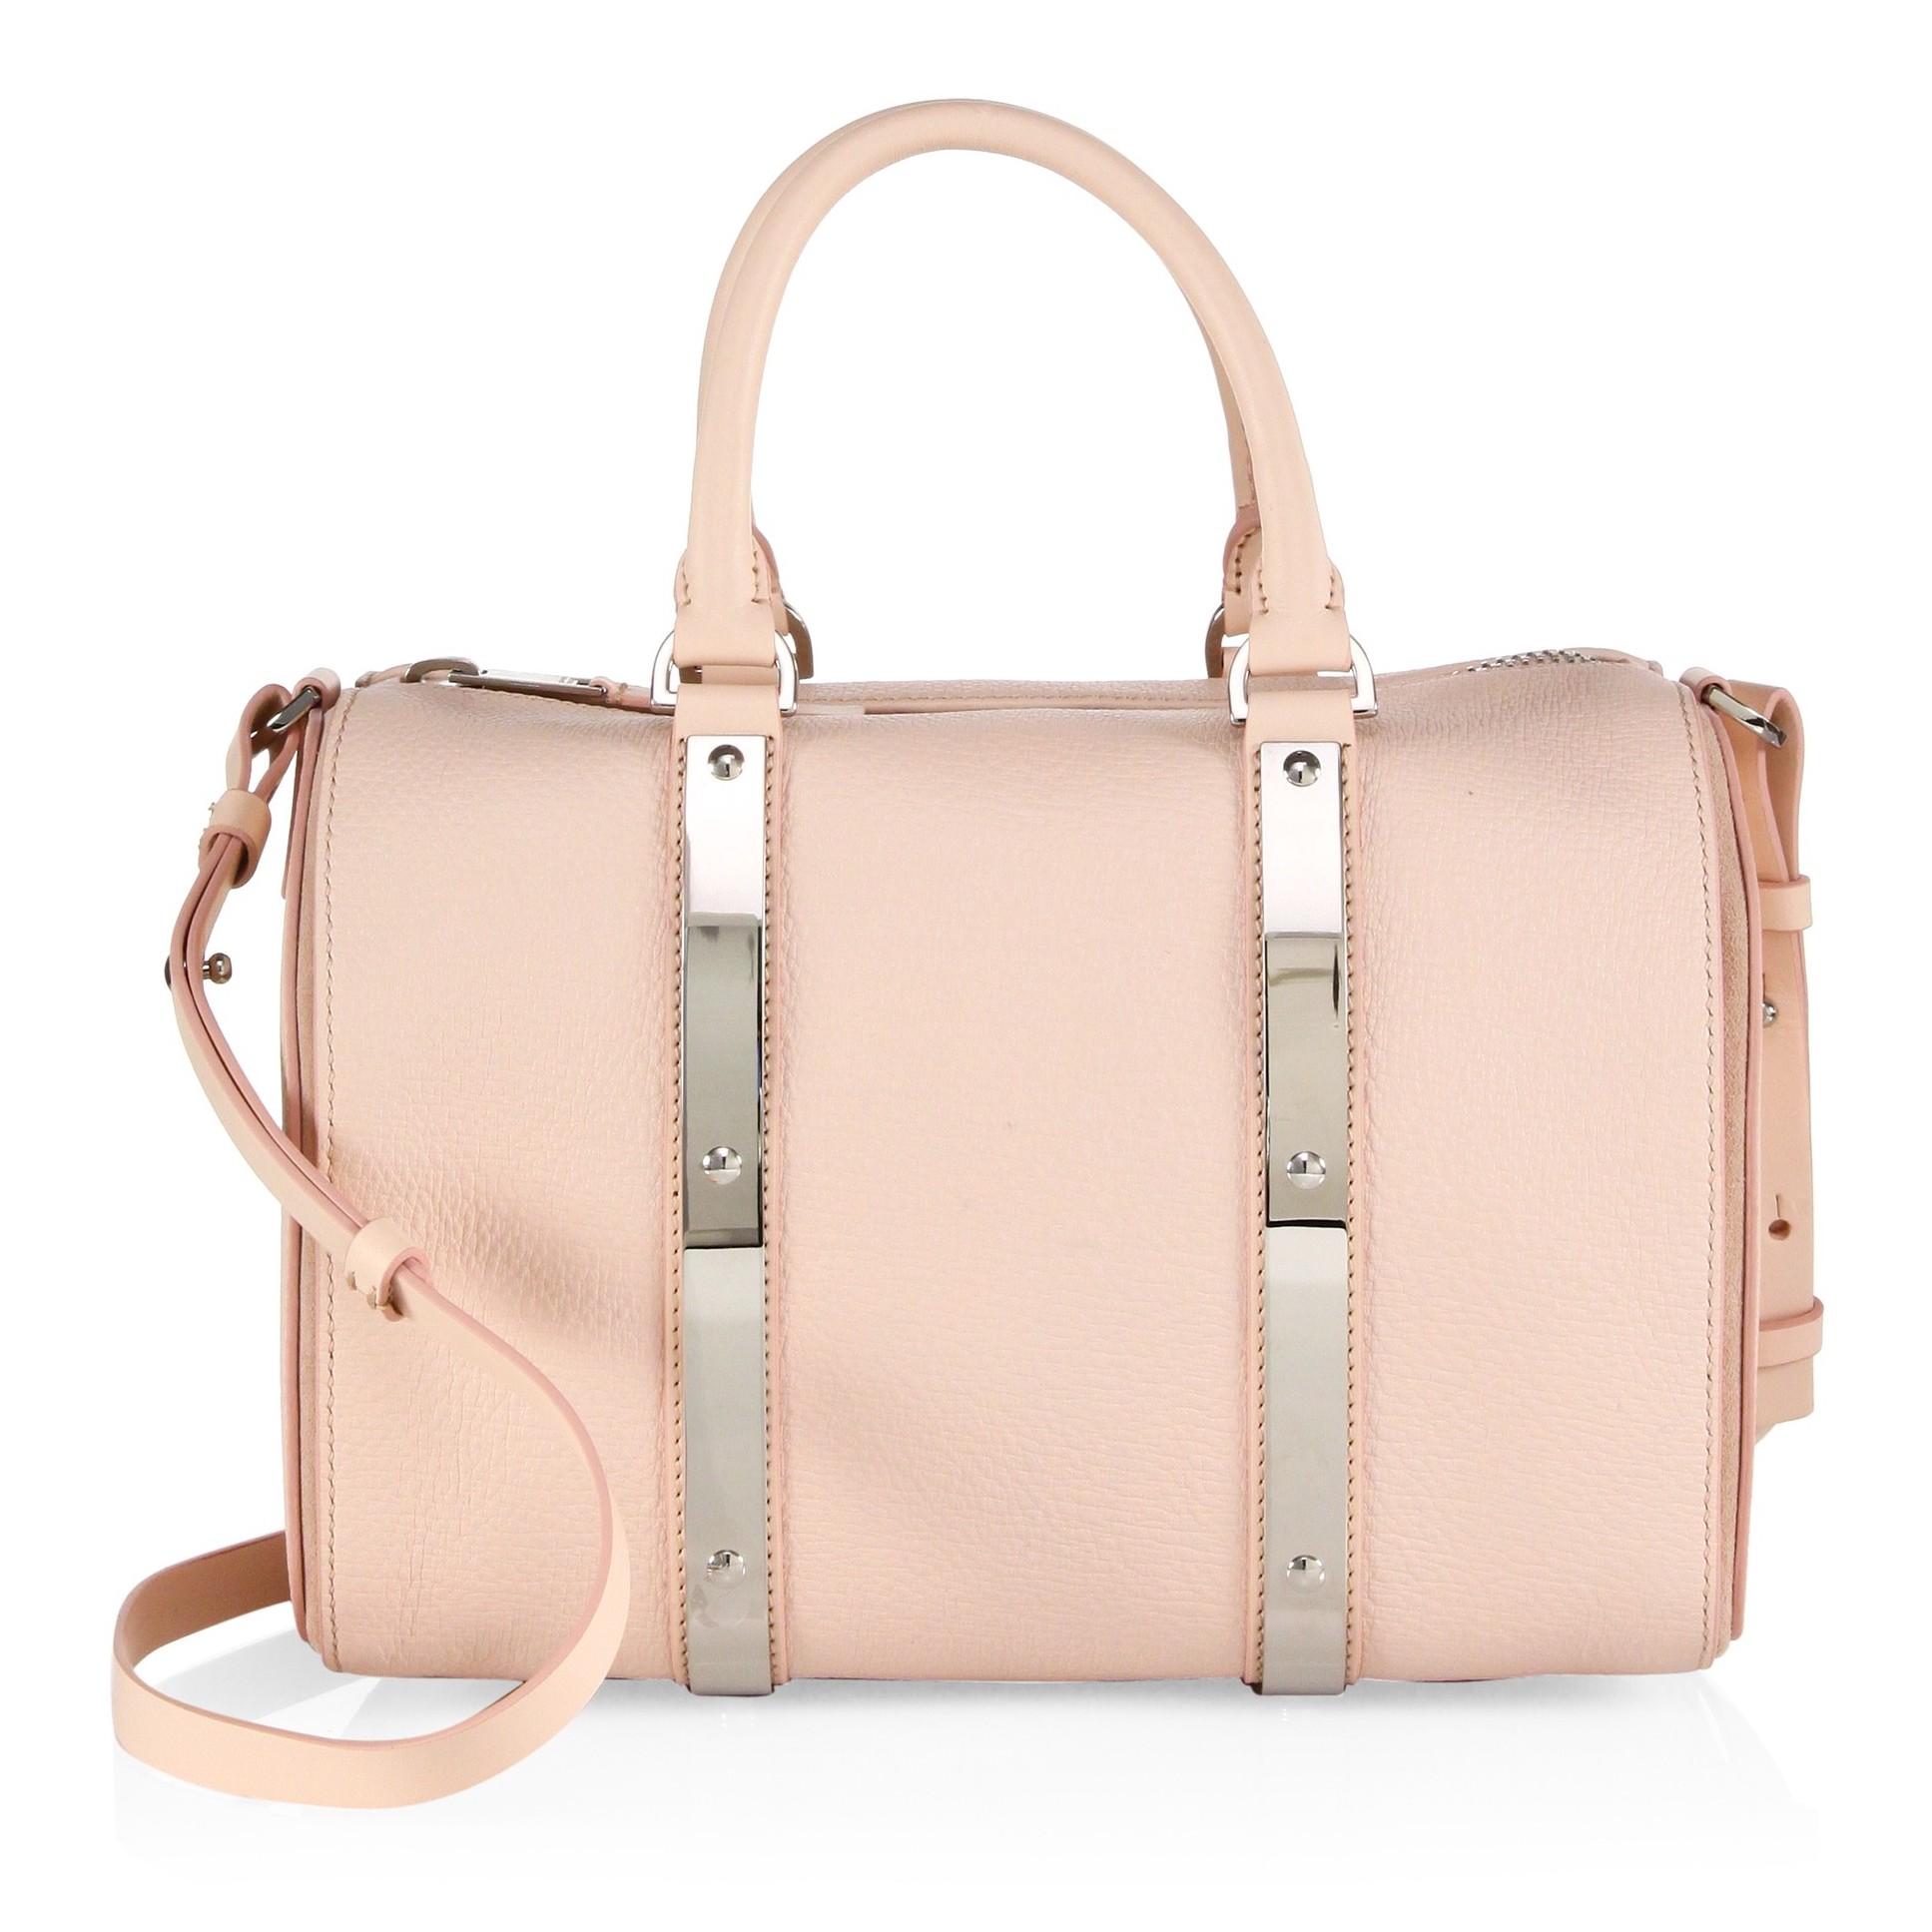 Sophie Hulme Charlton Leather Bowling Bag In Blossom Pink | ModeSens